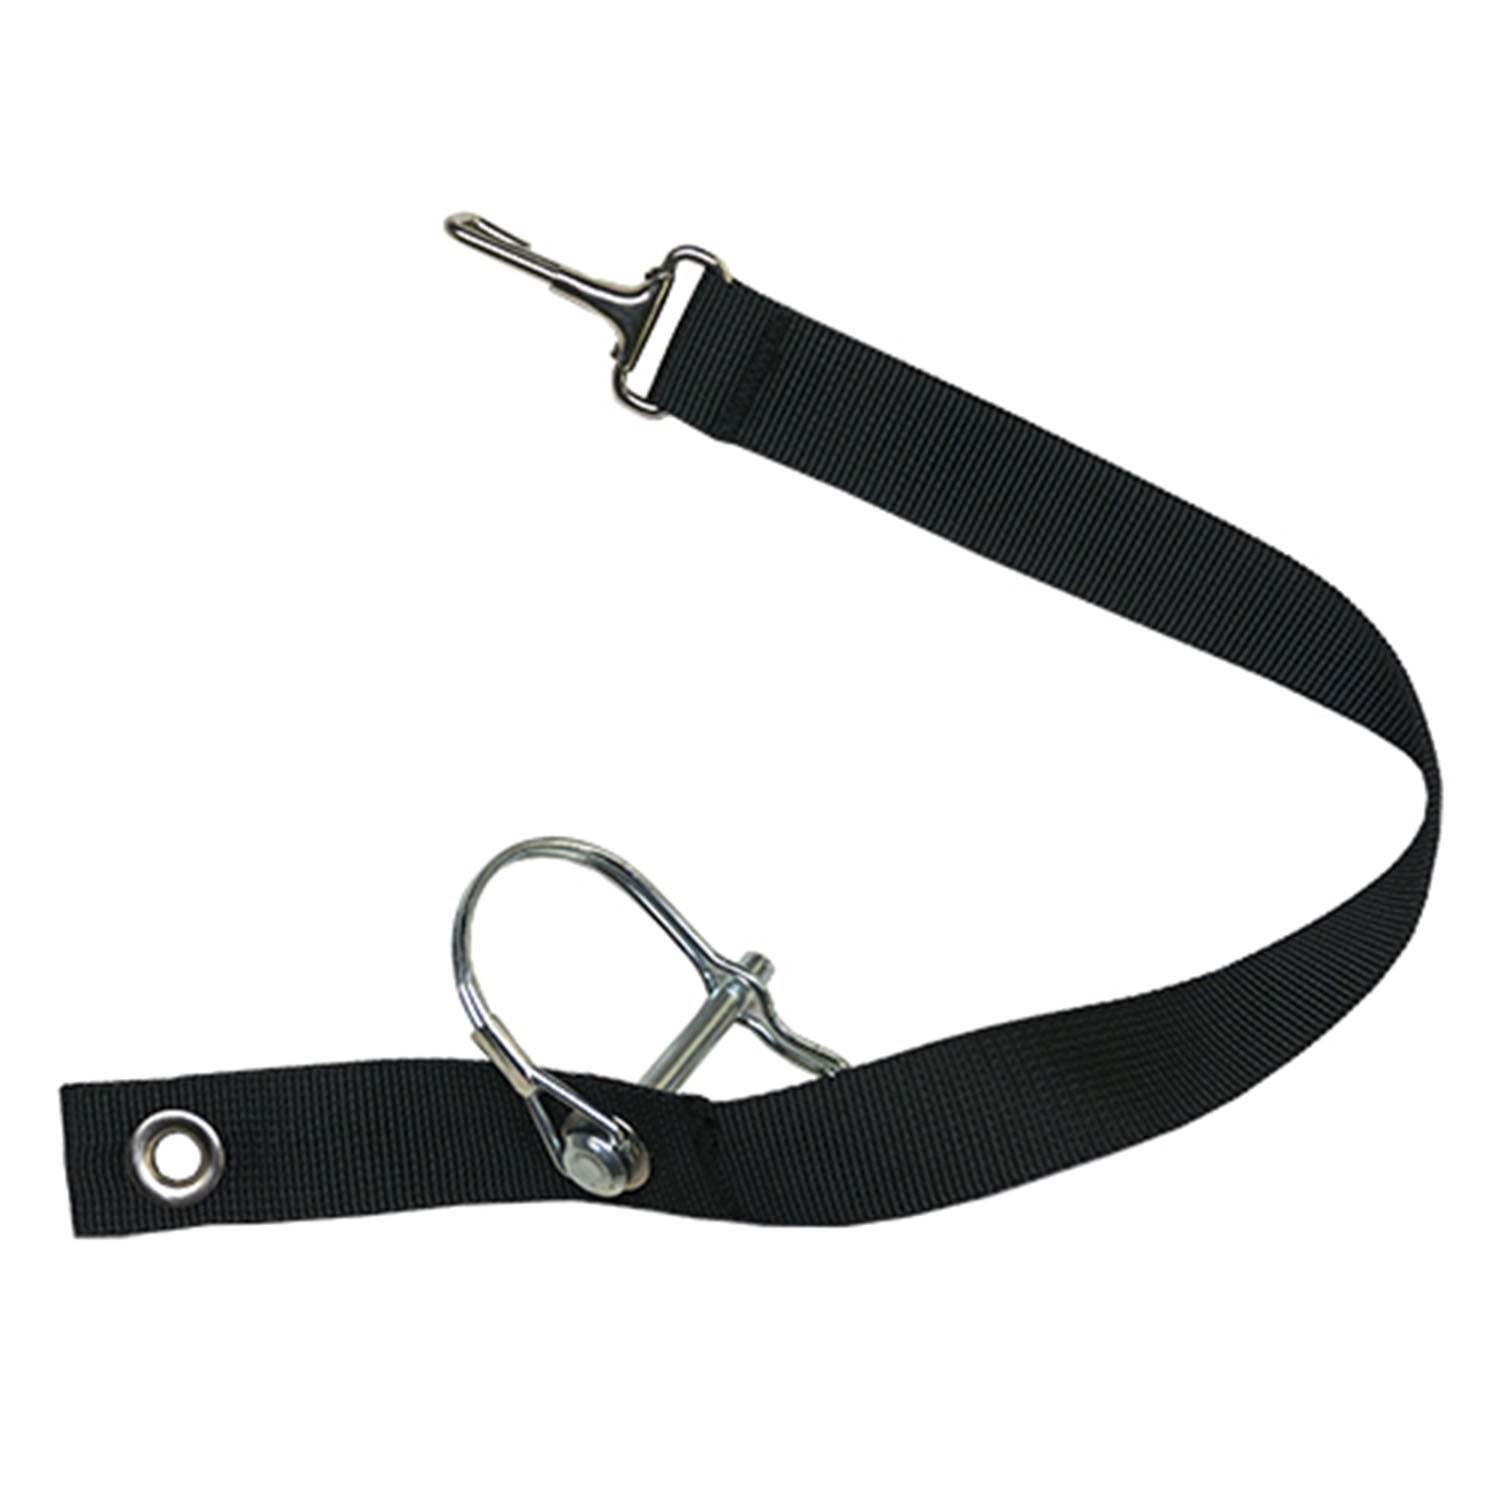 Burley Long Safety Strap 19.25" (489mm) Assembly With Hitch Pin and Retainer